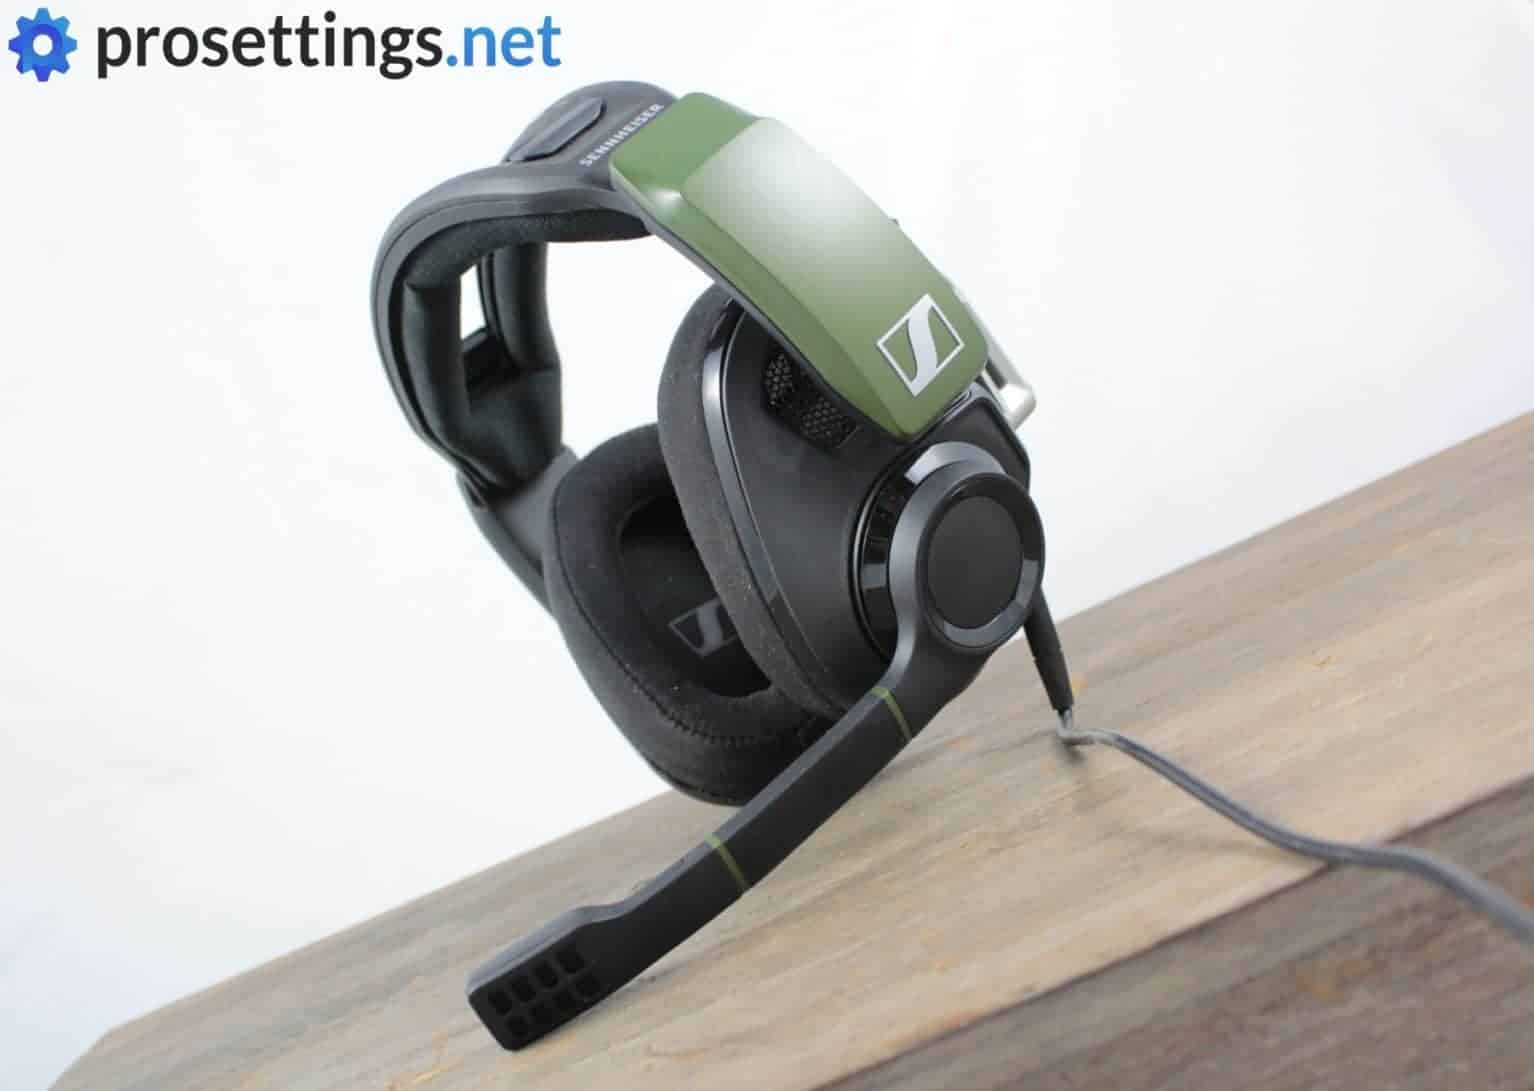 Best headset for Gaming